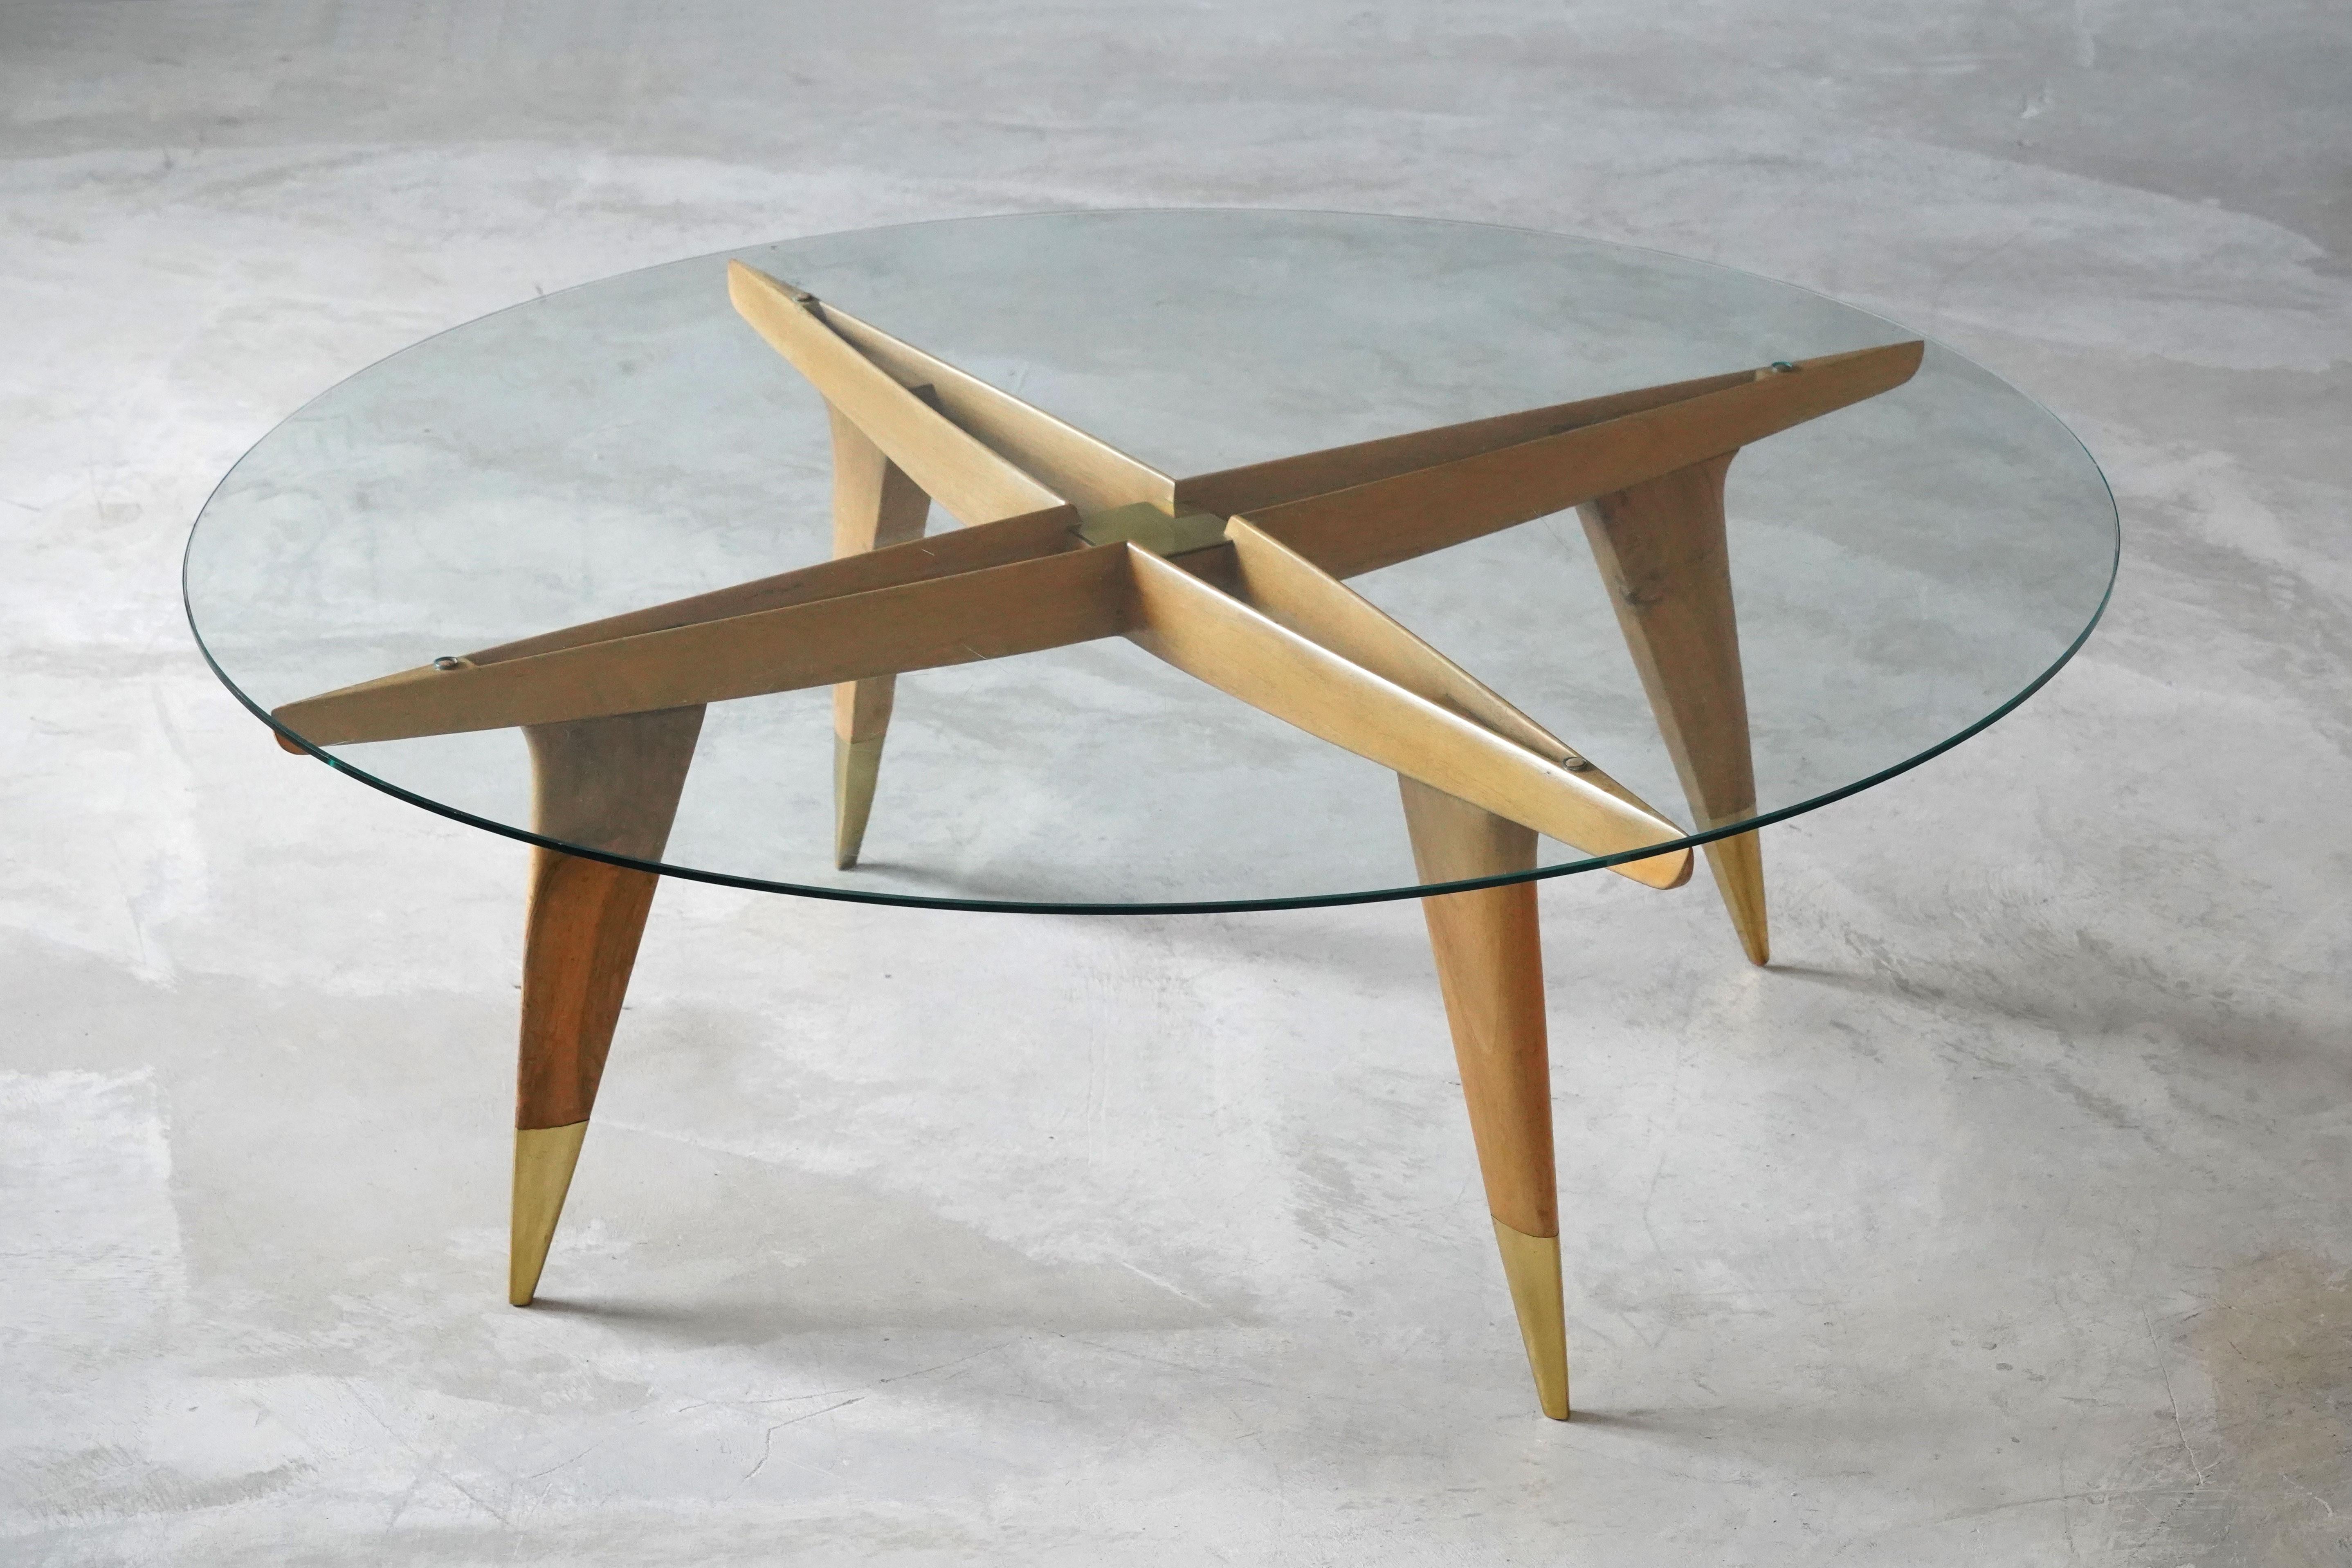 An iconic and rare coffee / cocktail table. Designed by Gio Ponti in his signature style. Production of studio-level quality carried out in the 1950s by M. Singer & Sons, New York, America. 

Other designers of the period include Ico Parisi, Jean